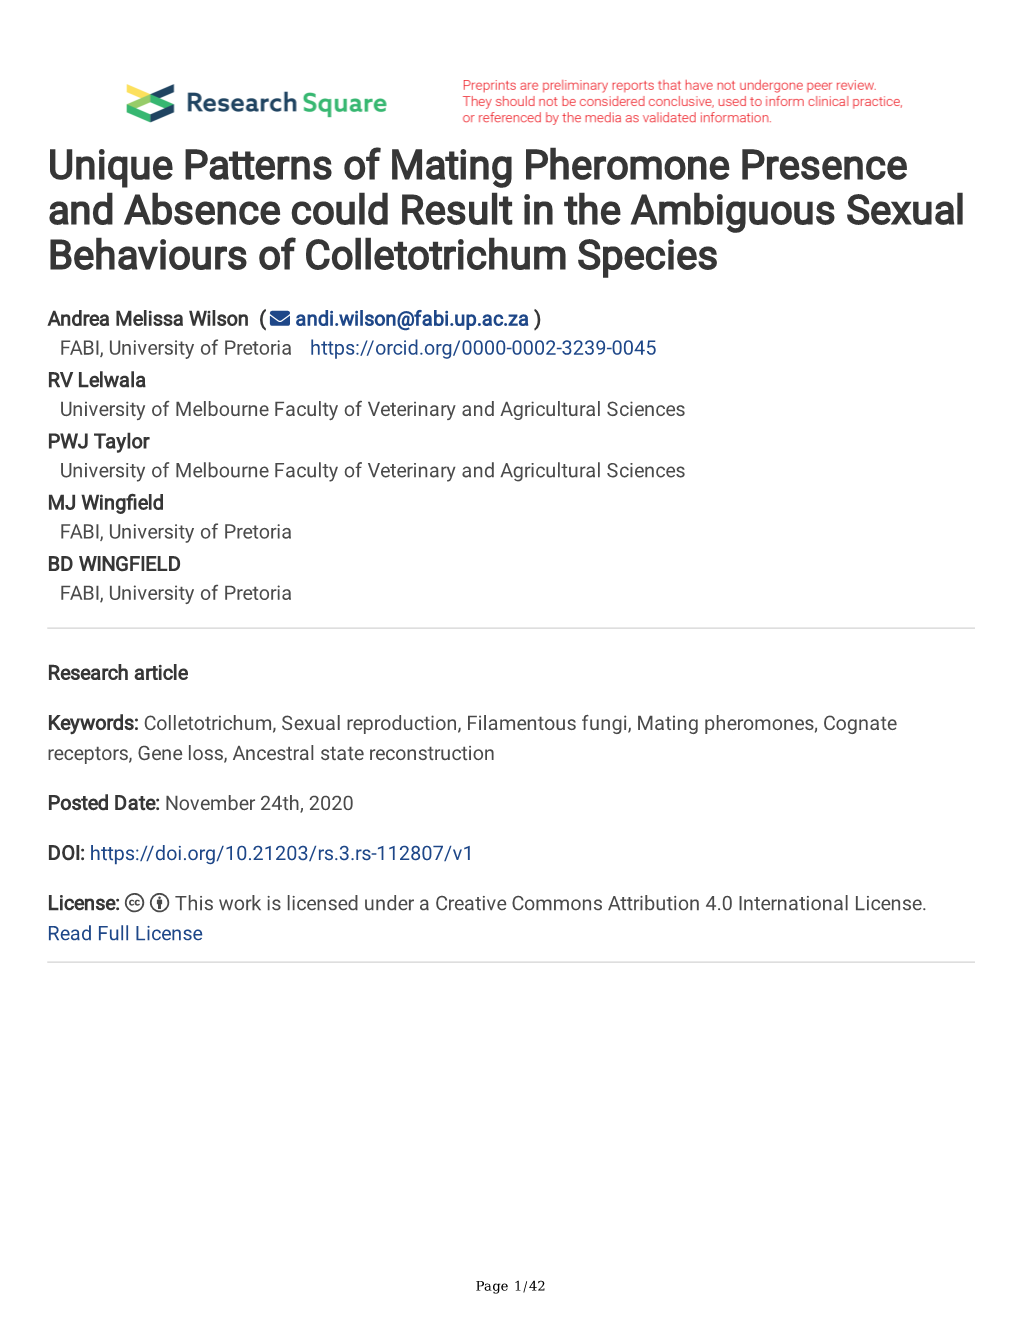 Unique Patterns of Mating Pheromone Presence and Absence Could Result in the Ambiguous Sexual Behaviours of Colletotrichum Species